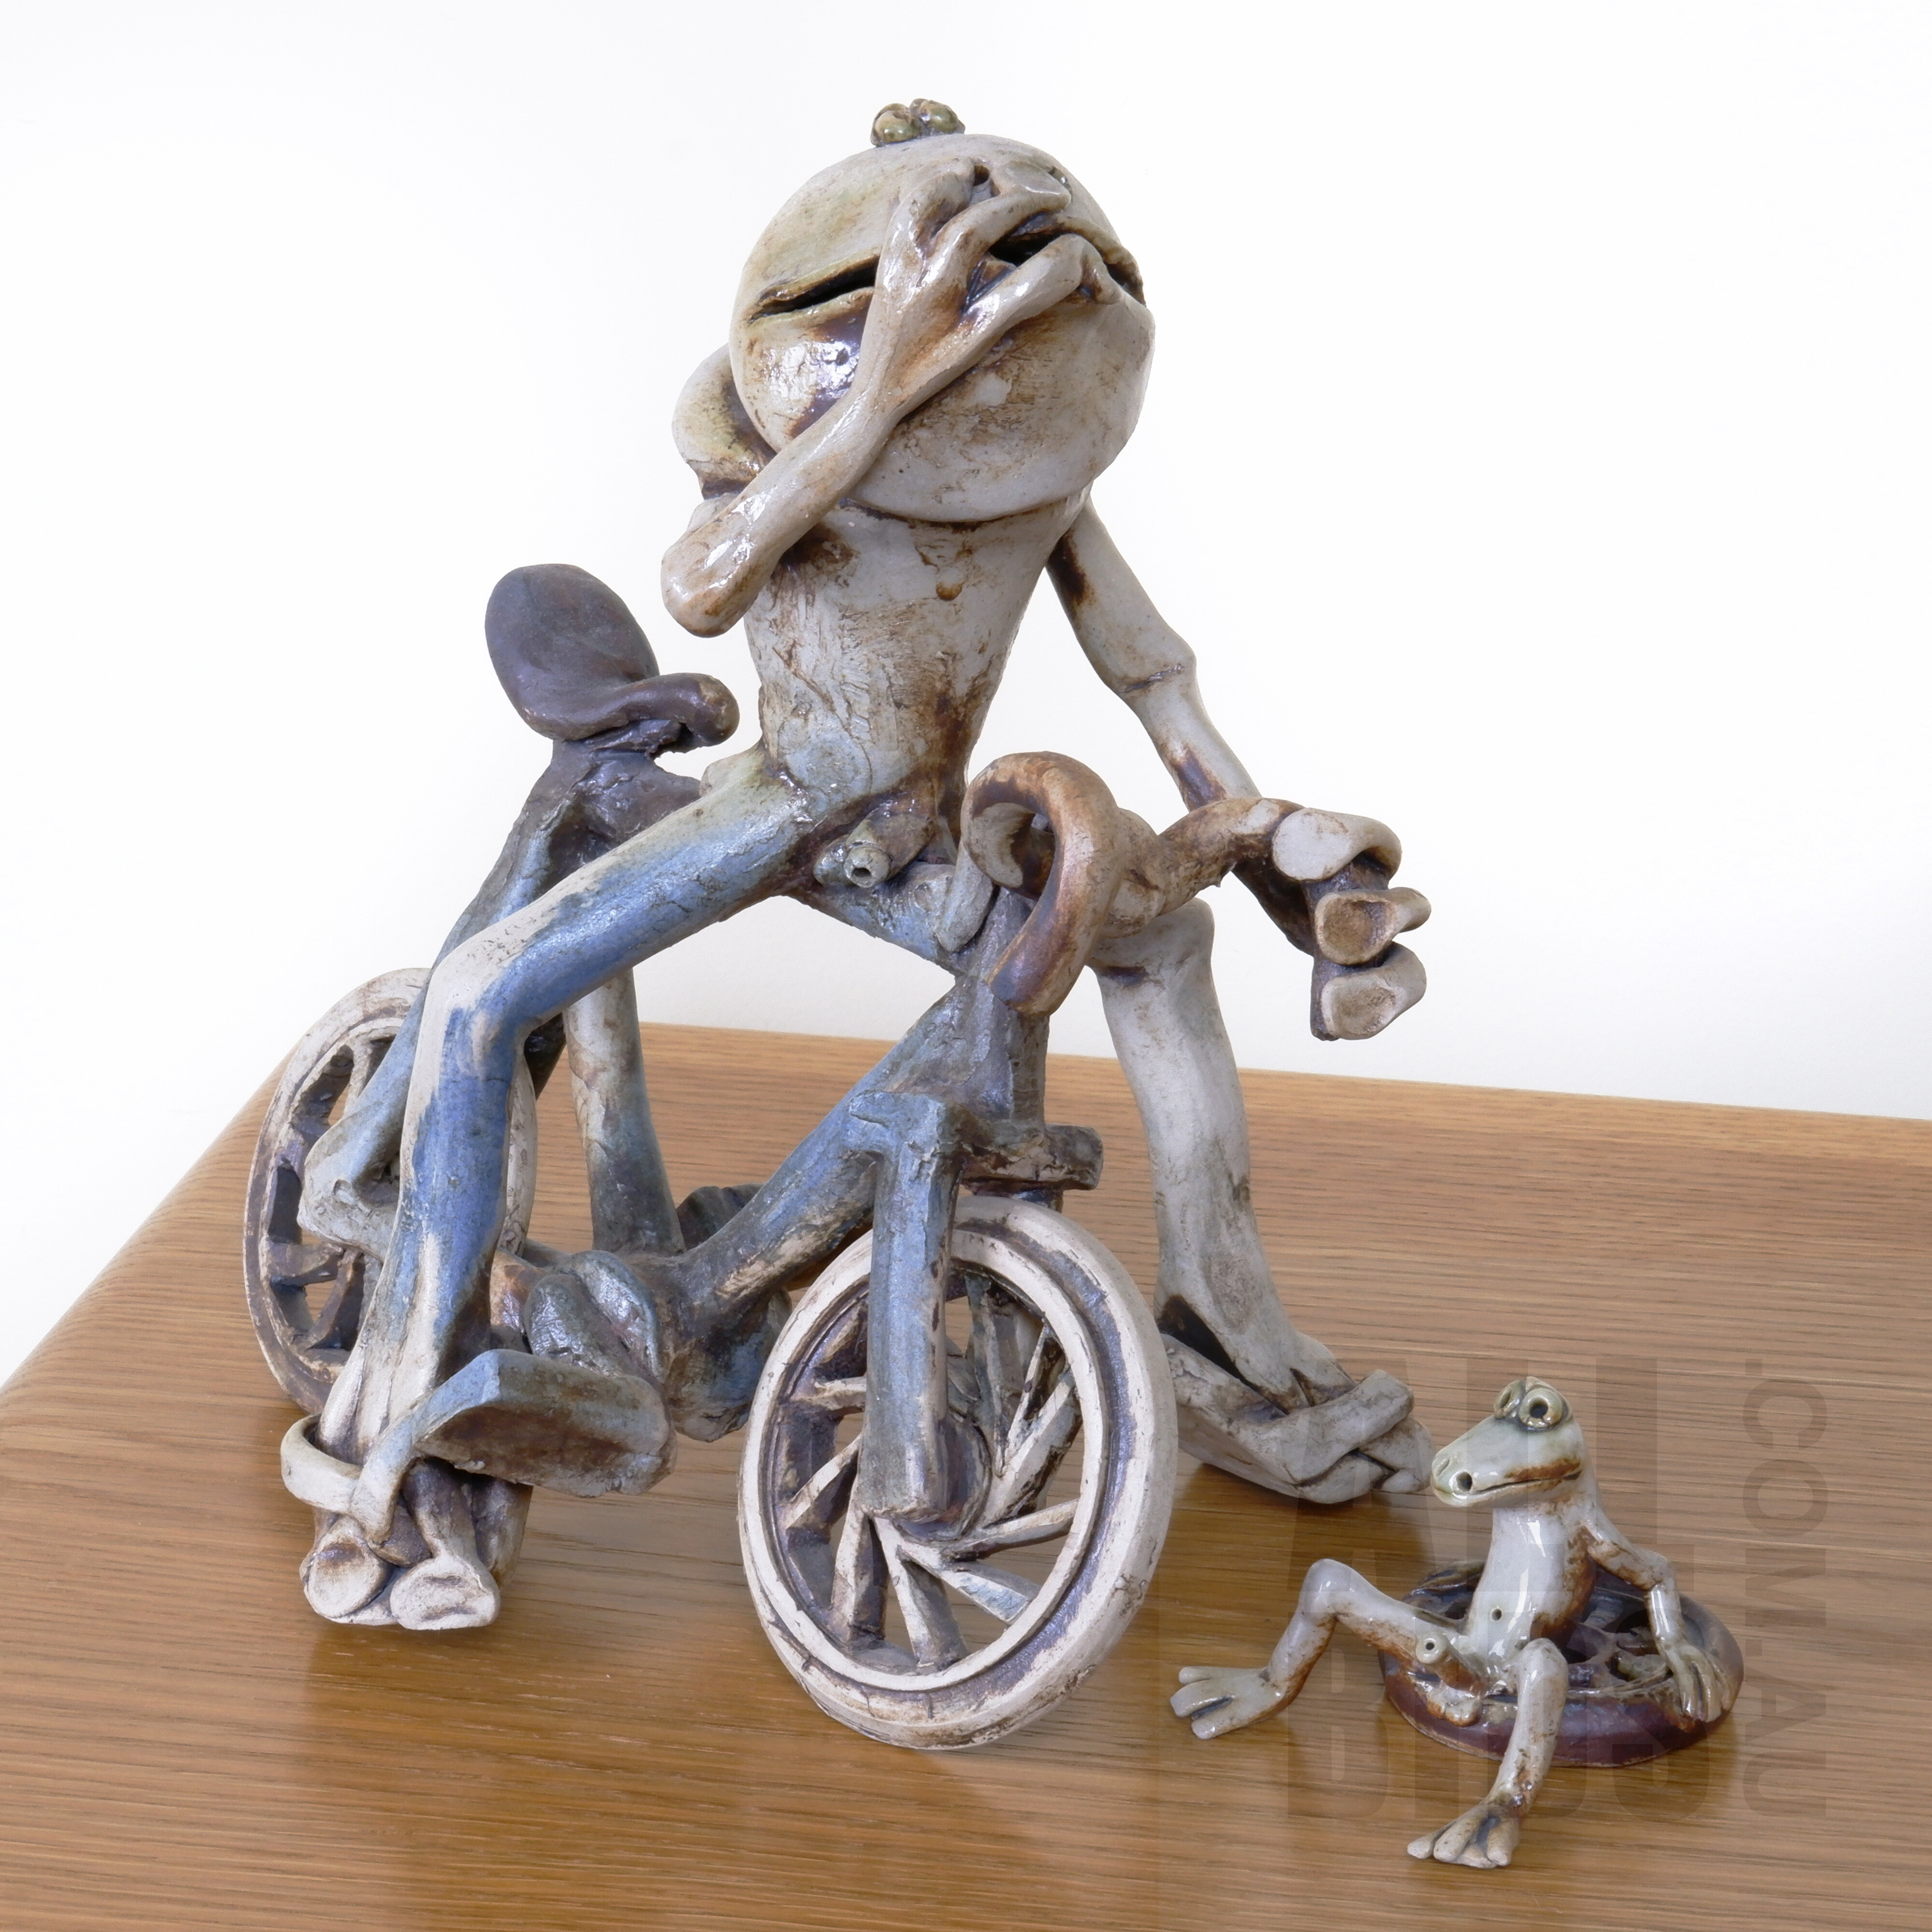 'Australian School Ceramic Sculpture of Frog Riding a Bicycle and Another Sitting on a Tire'